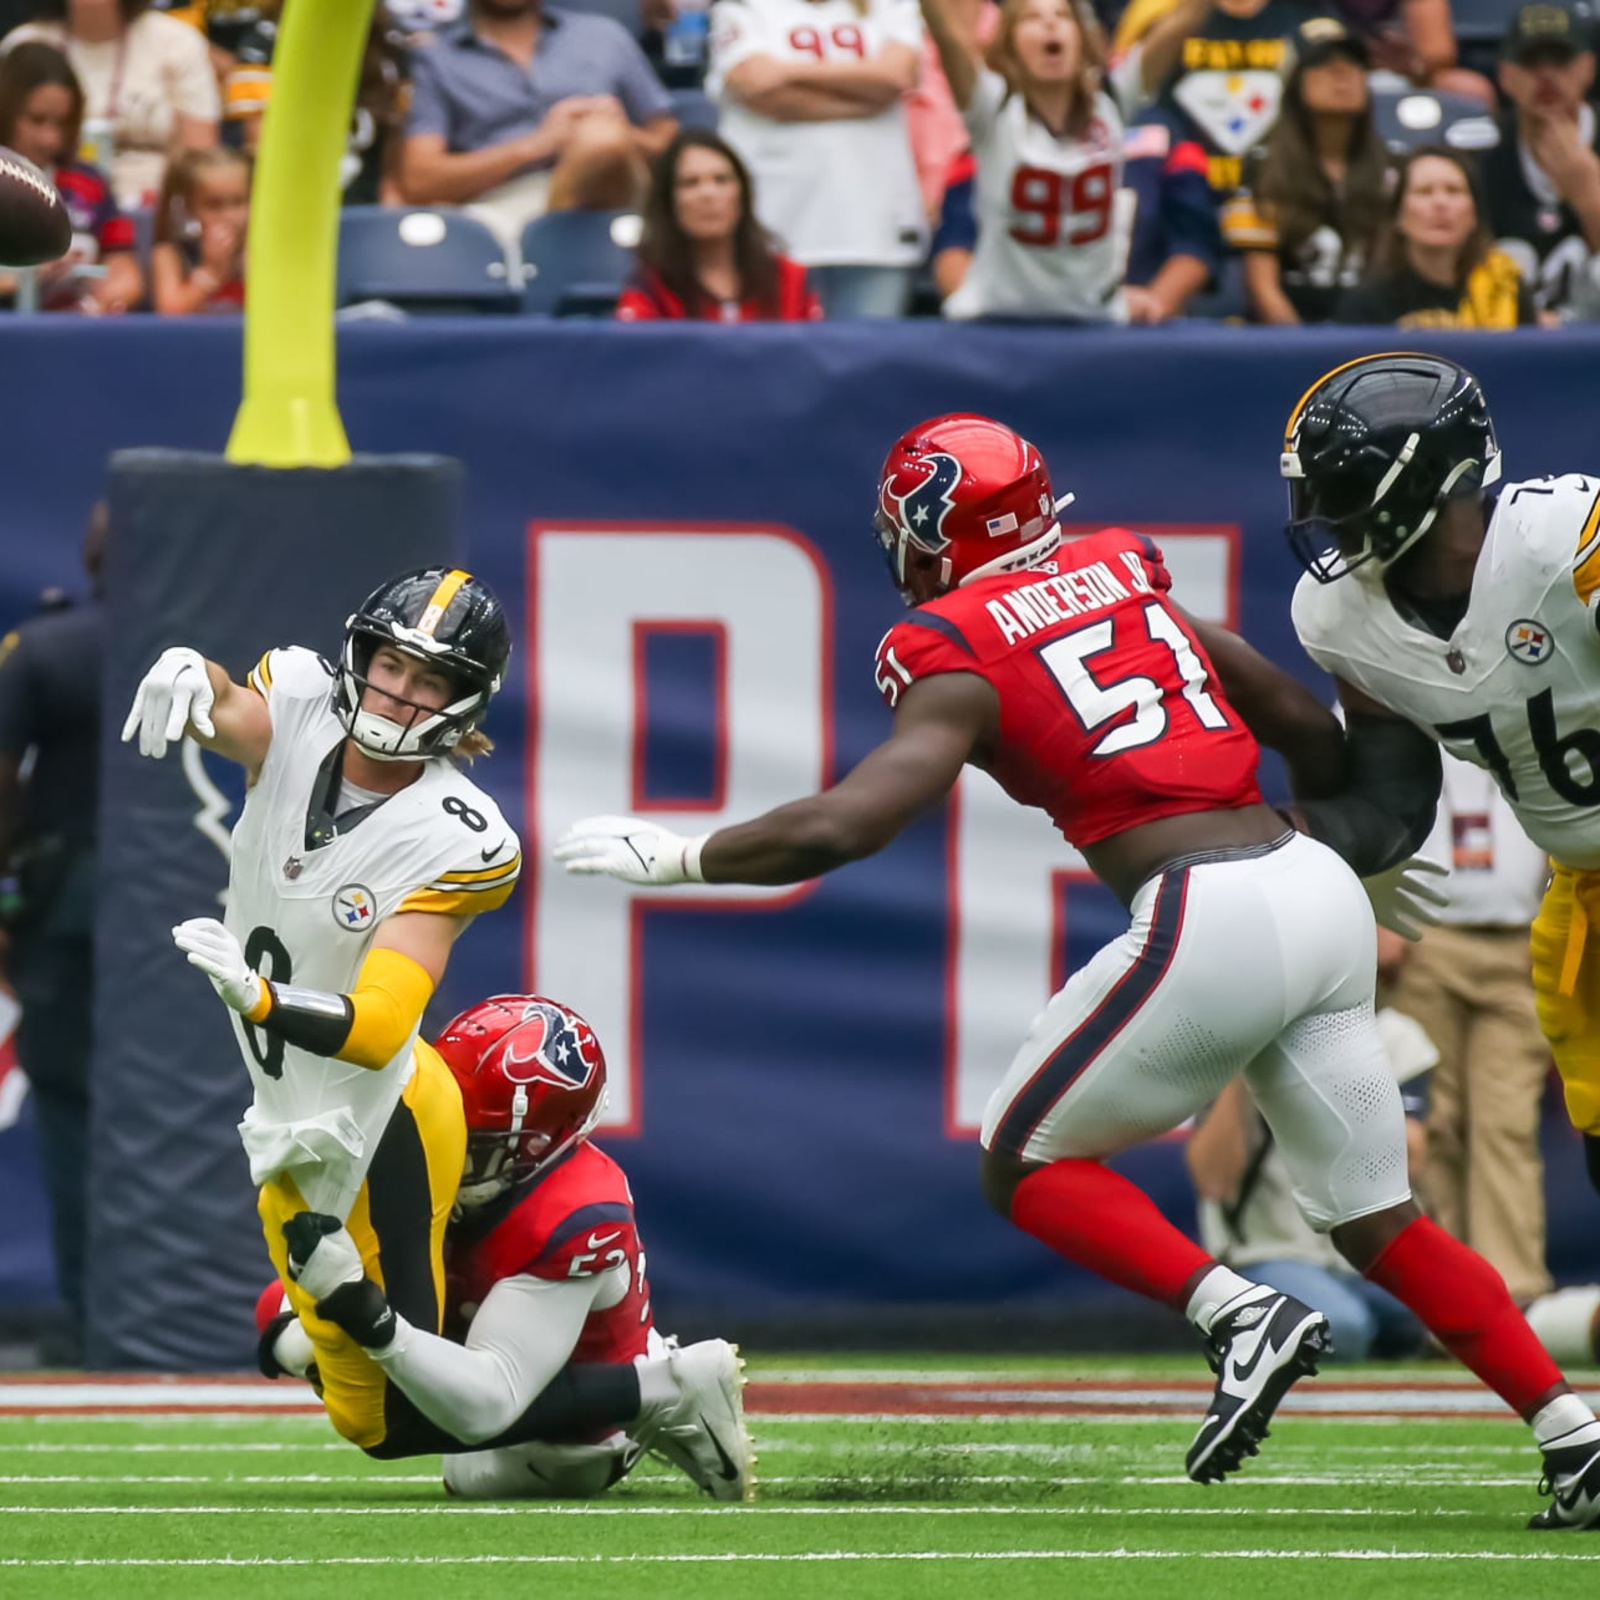 How to Stream the Steelers vs. Texans Game Live - Week 4